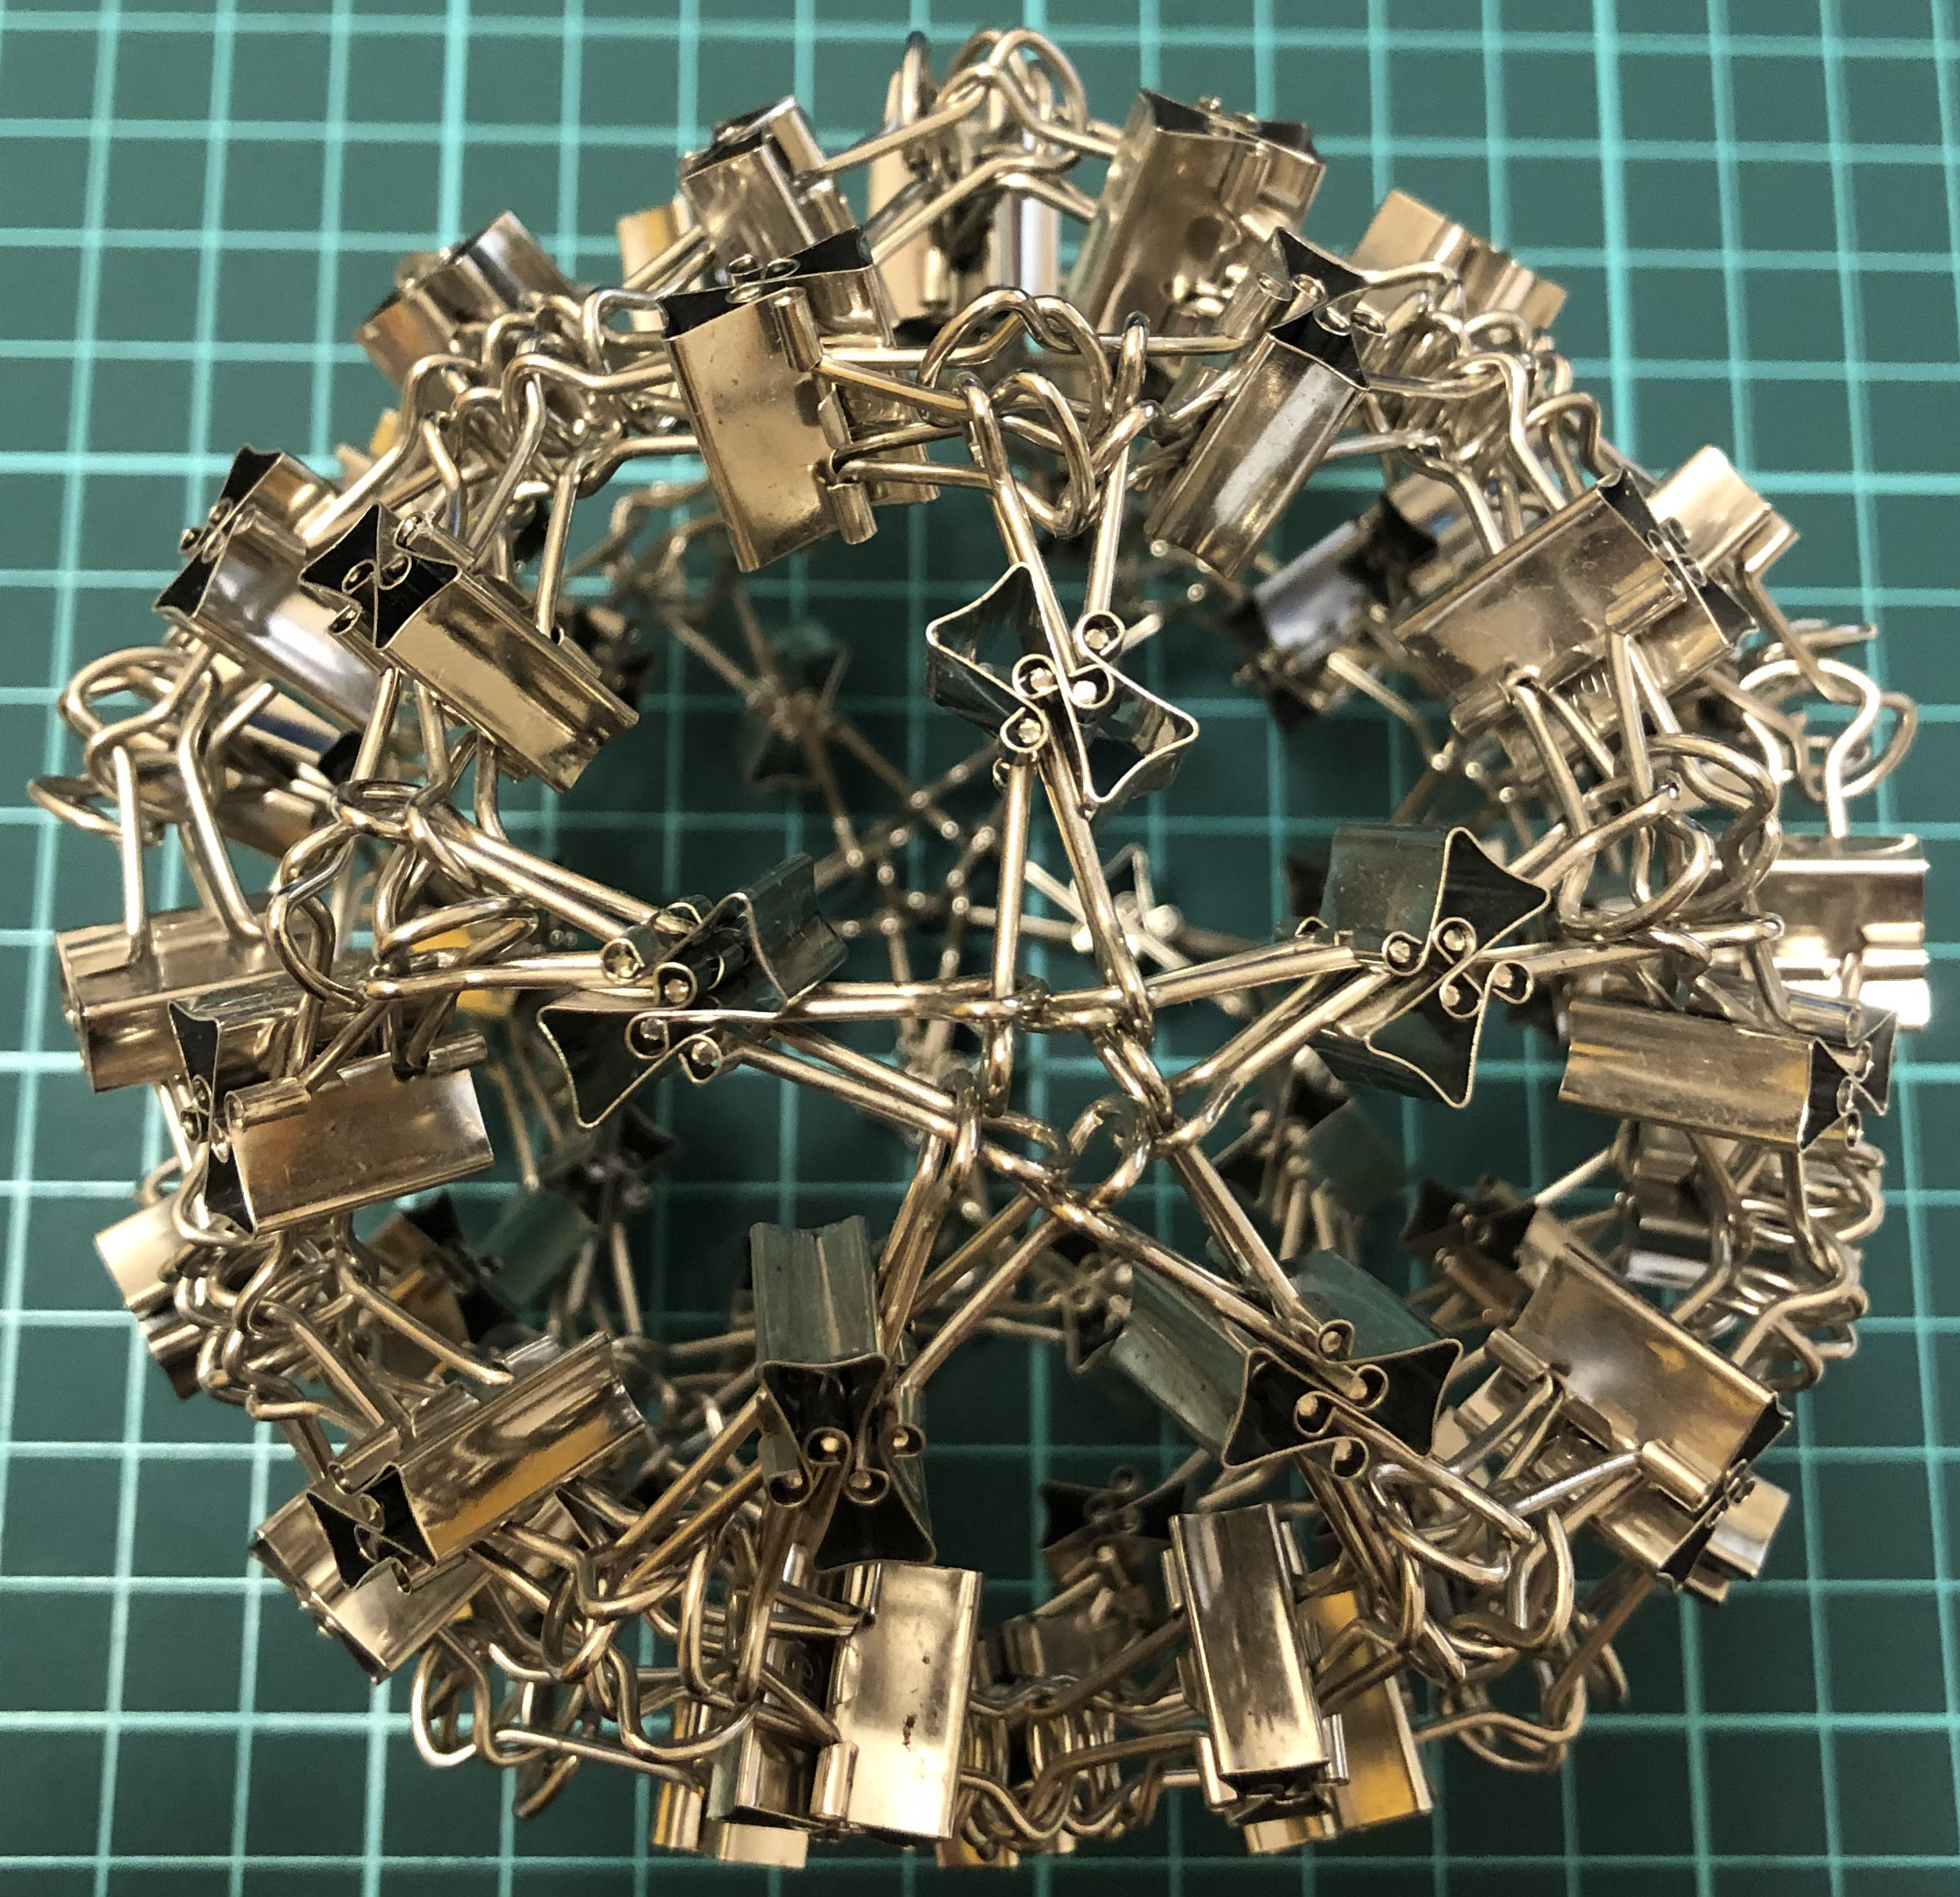 120 clips forming 60 I-edges forming rhombic triacontahedron